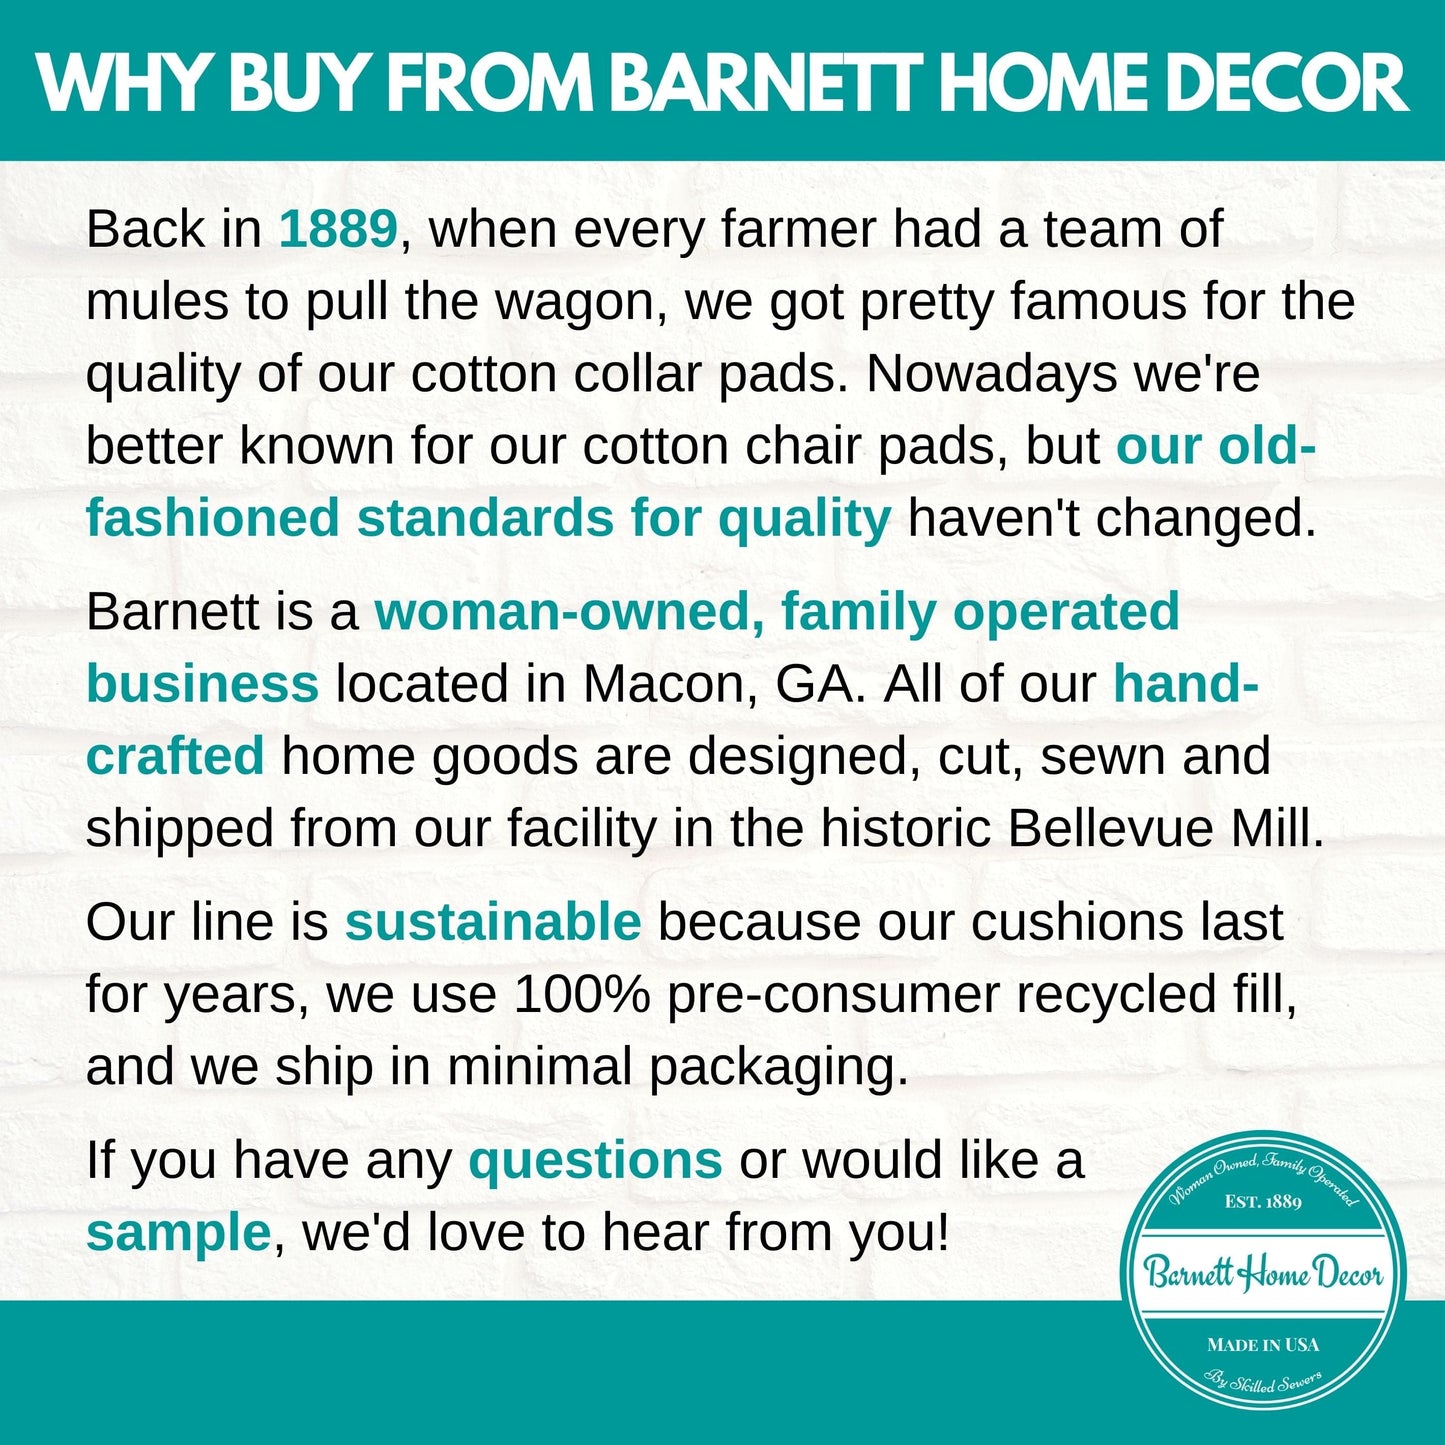 Why Buy From Barnett Home Decor? We're a woman-owned, family run business located in Macon, GA producing hand crafted home good made in USA